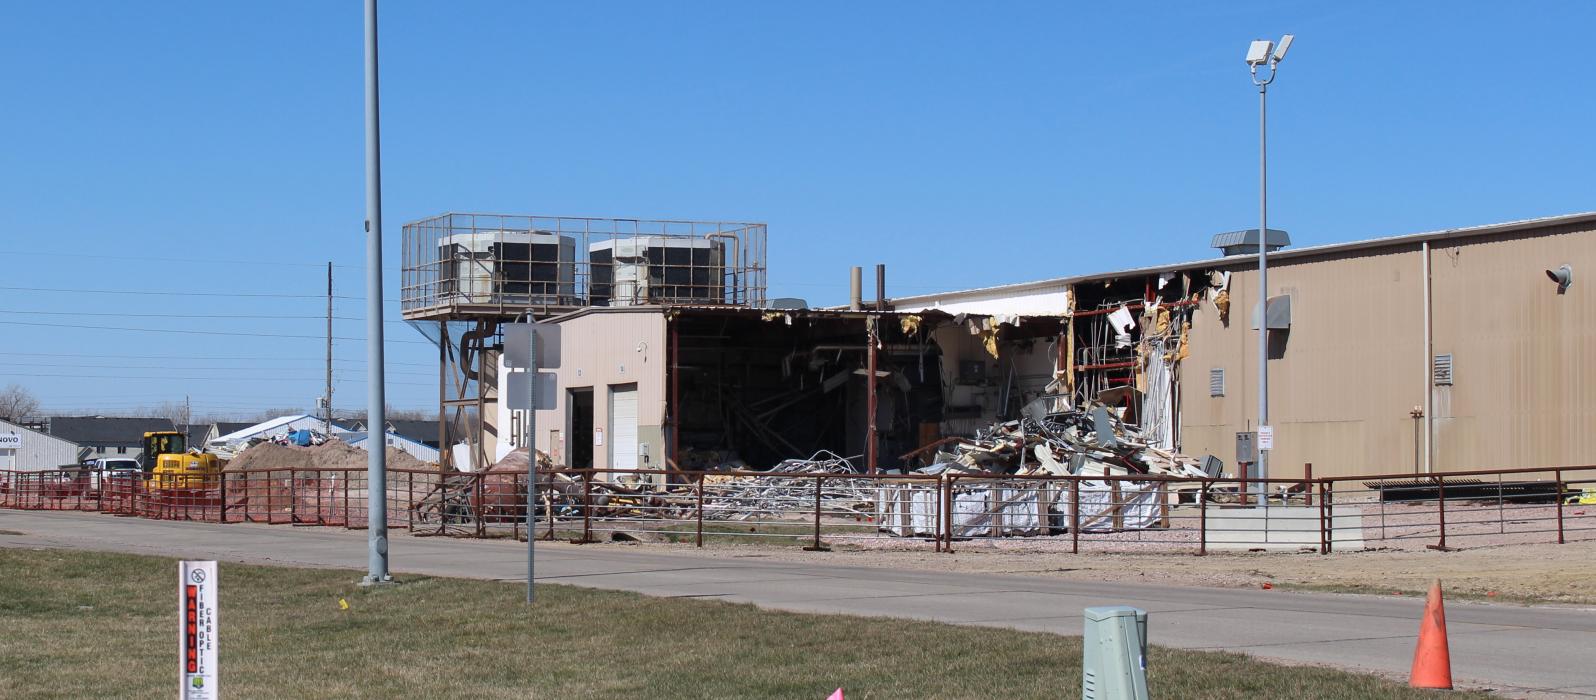 This week, March 18-22, Royal Canin began the demolition of their old facility. Since the building of their new facility has been completed, the old one is no longer needed for their operations. Photo by Beth Hutcheson • times1reporter@gmail.com